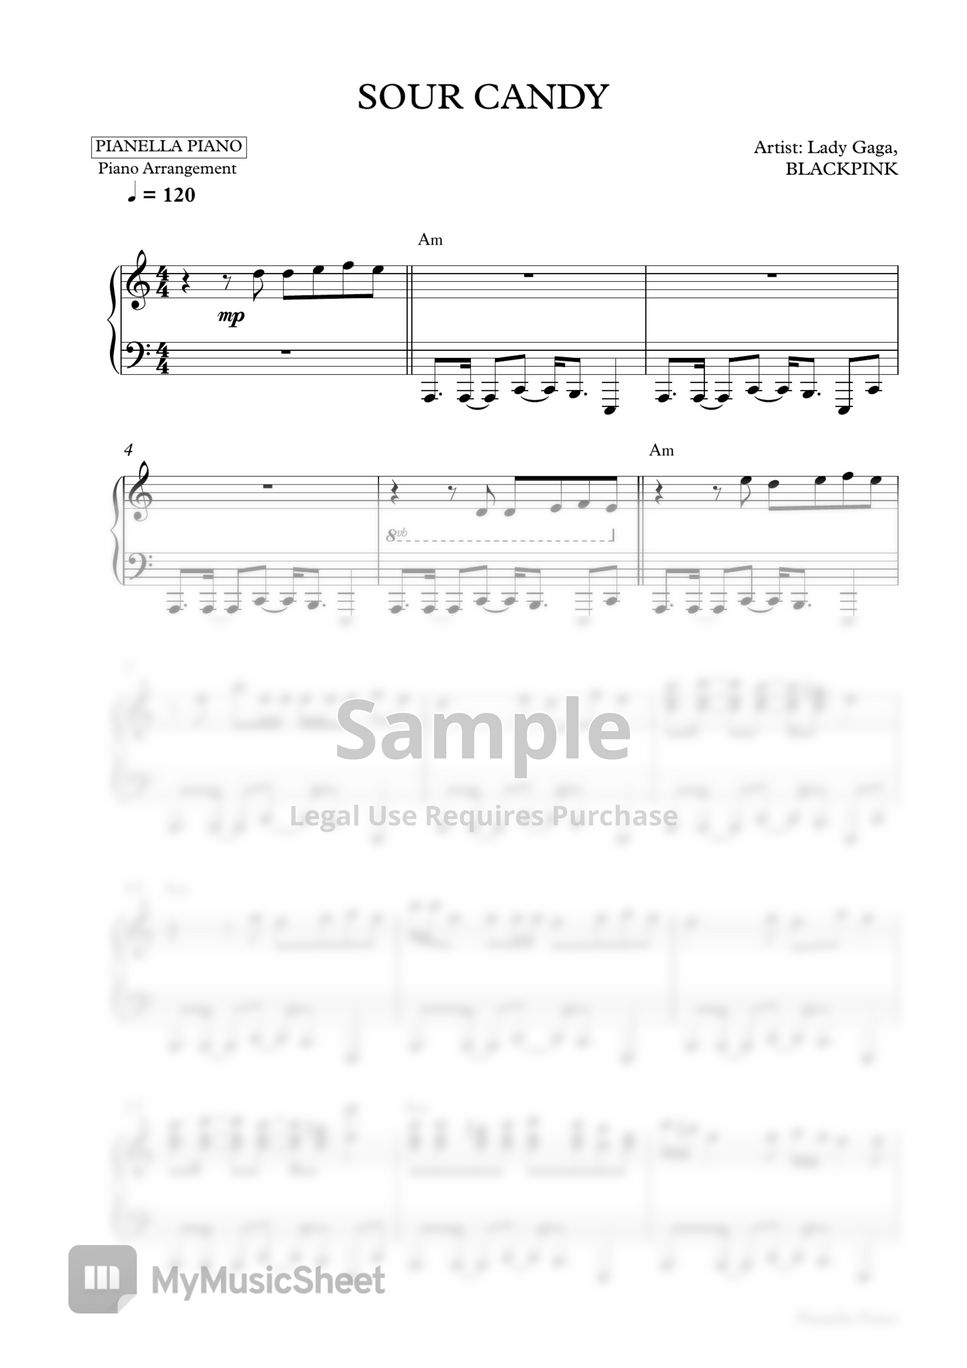 Lady Gaga, BLACKPINK - SOUR CANDY by Pianella Piano (Piano Sheet + Drum Backing Track)